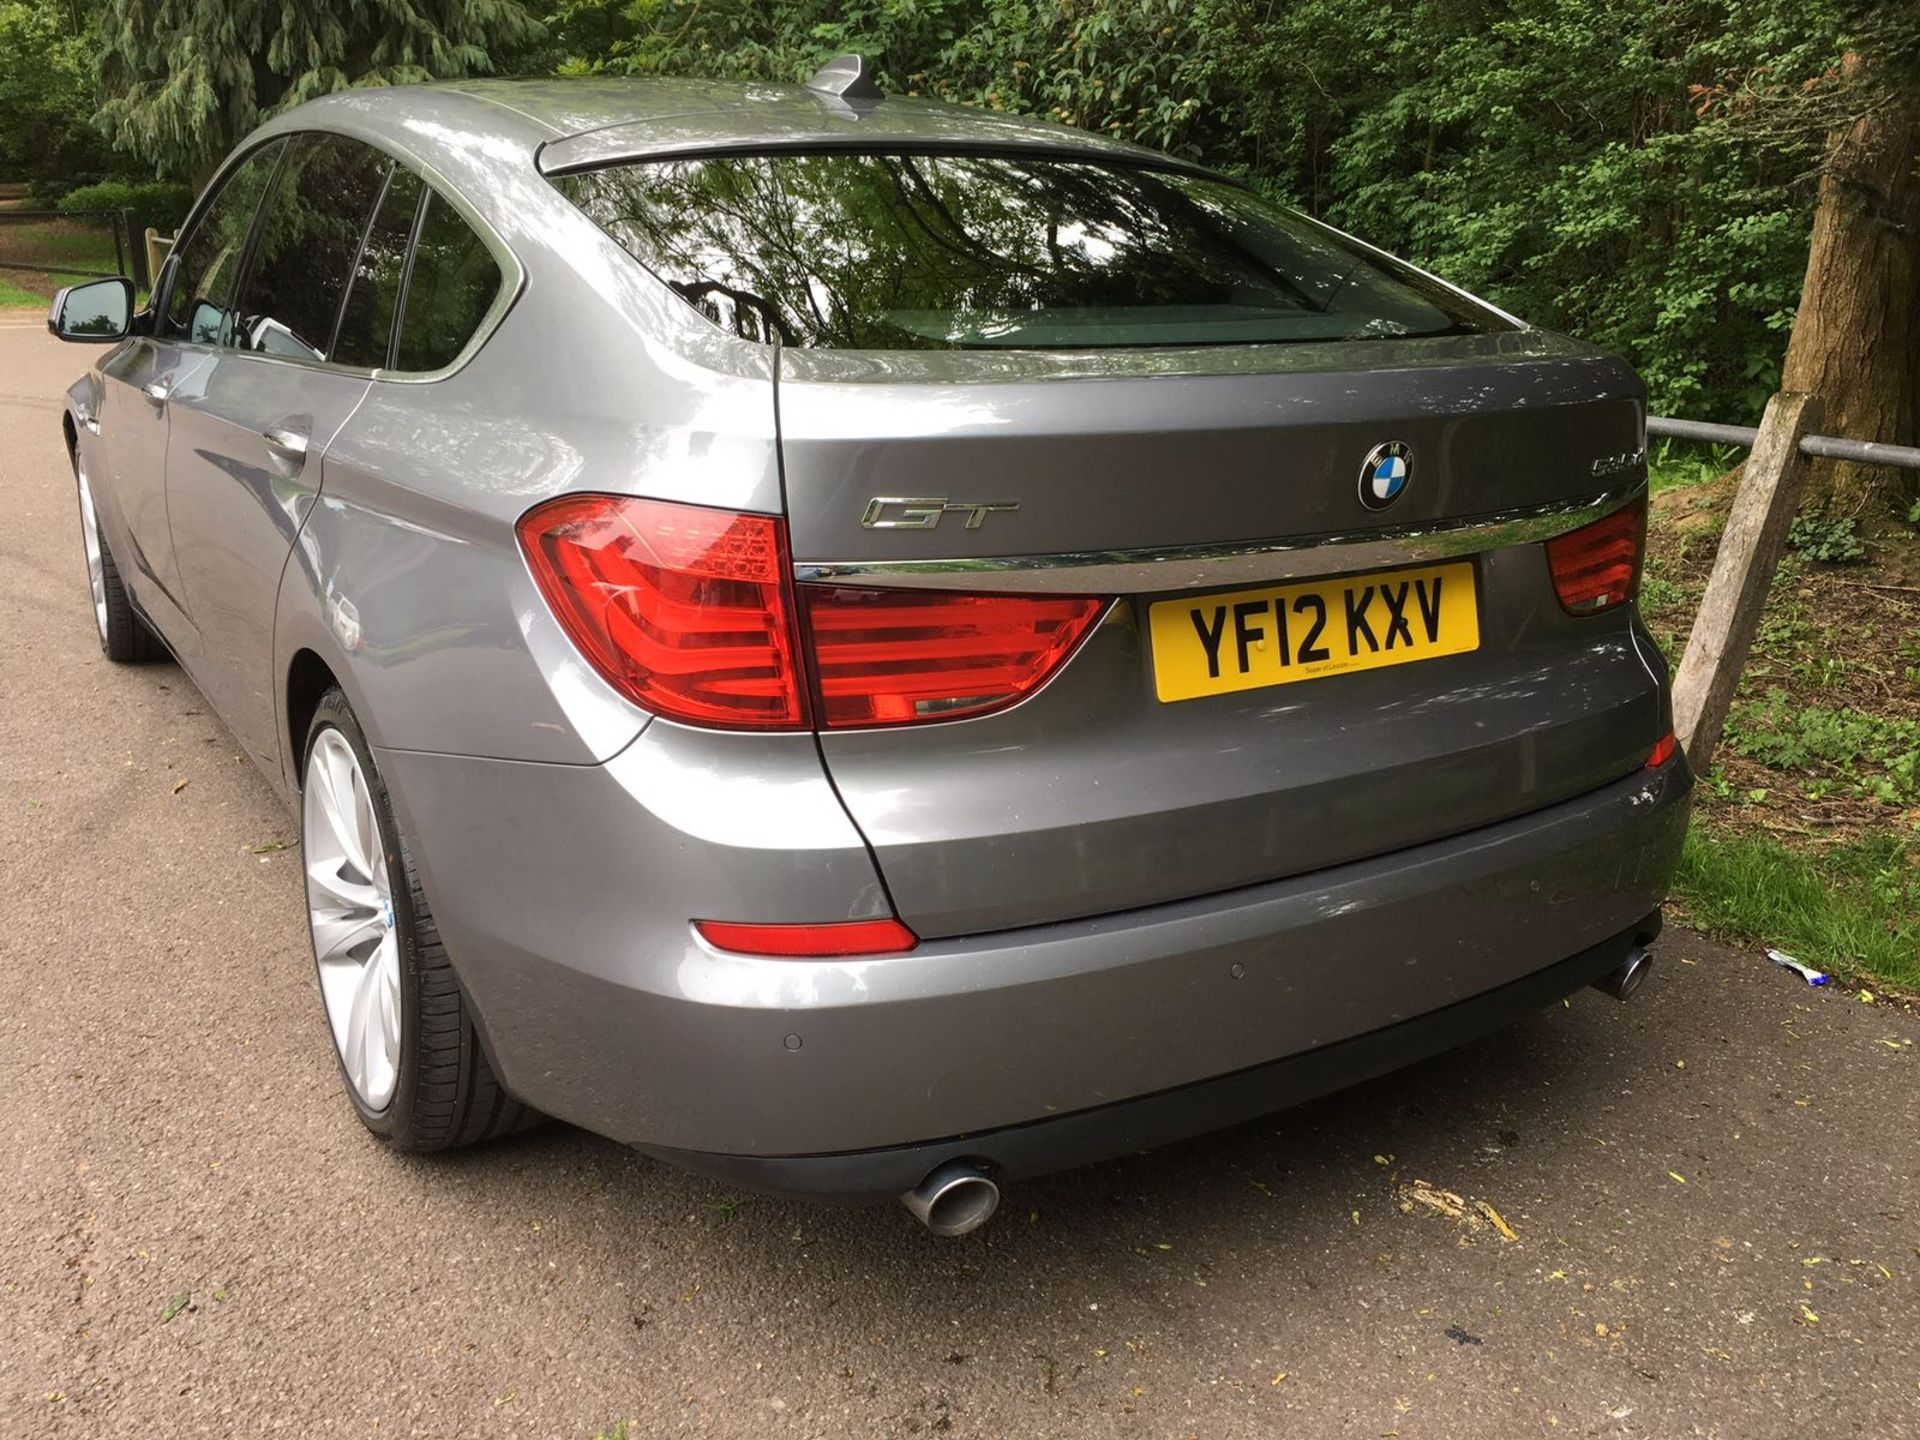 BMW 535D GT Gran Turismo 2012/12. 57,000 Miles. Automatic Gearbox - Image 6 of 19